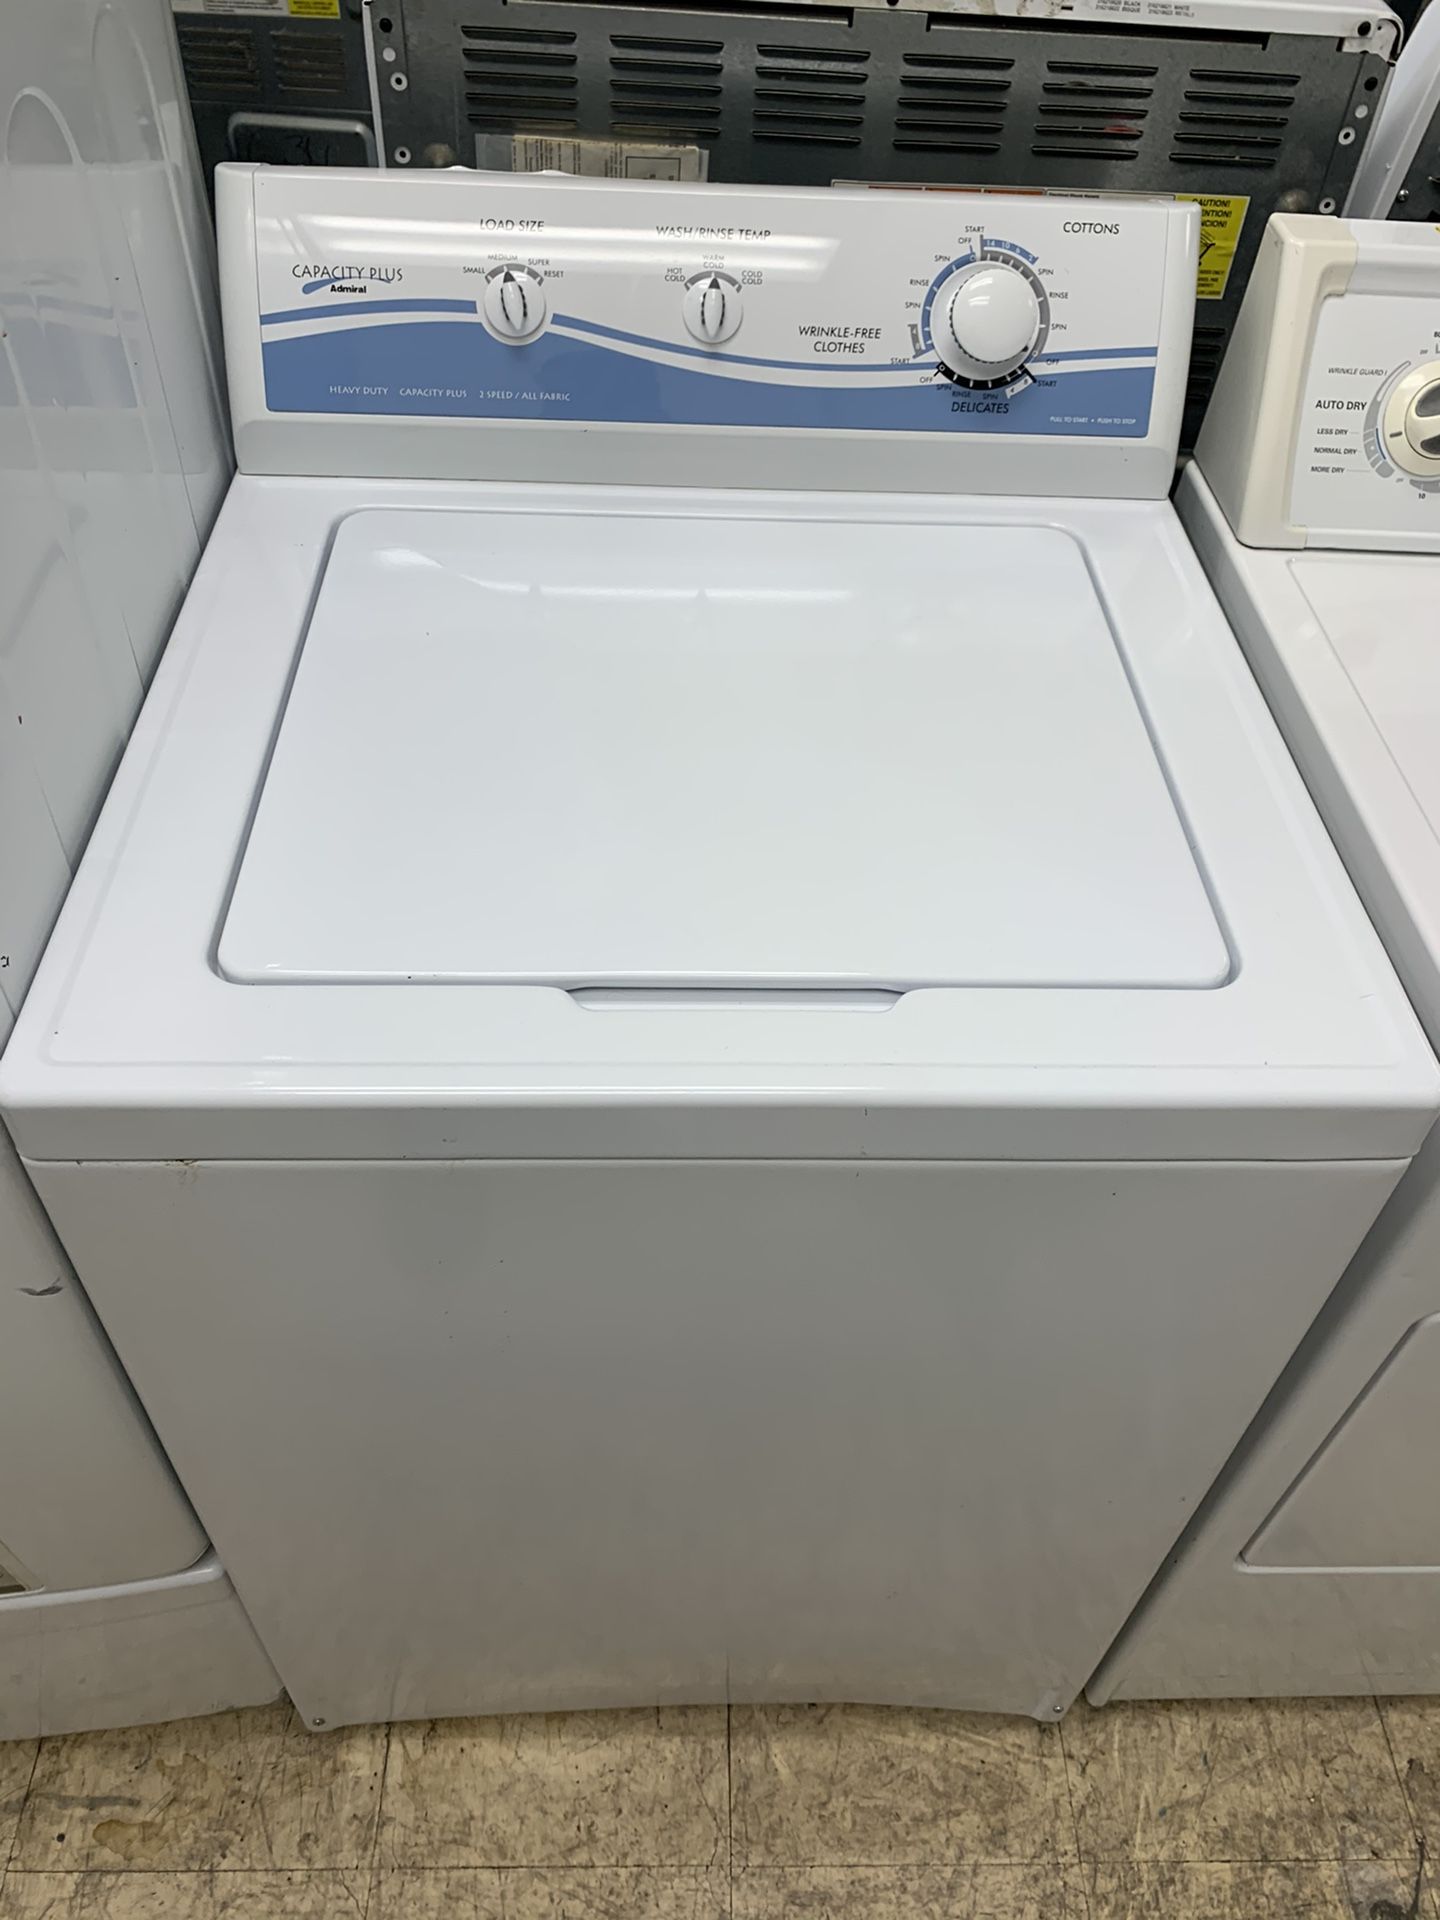 Admiral heavy duty capacity plus washer